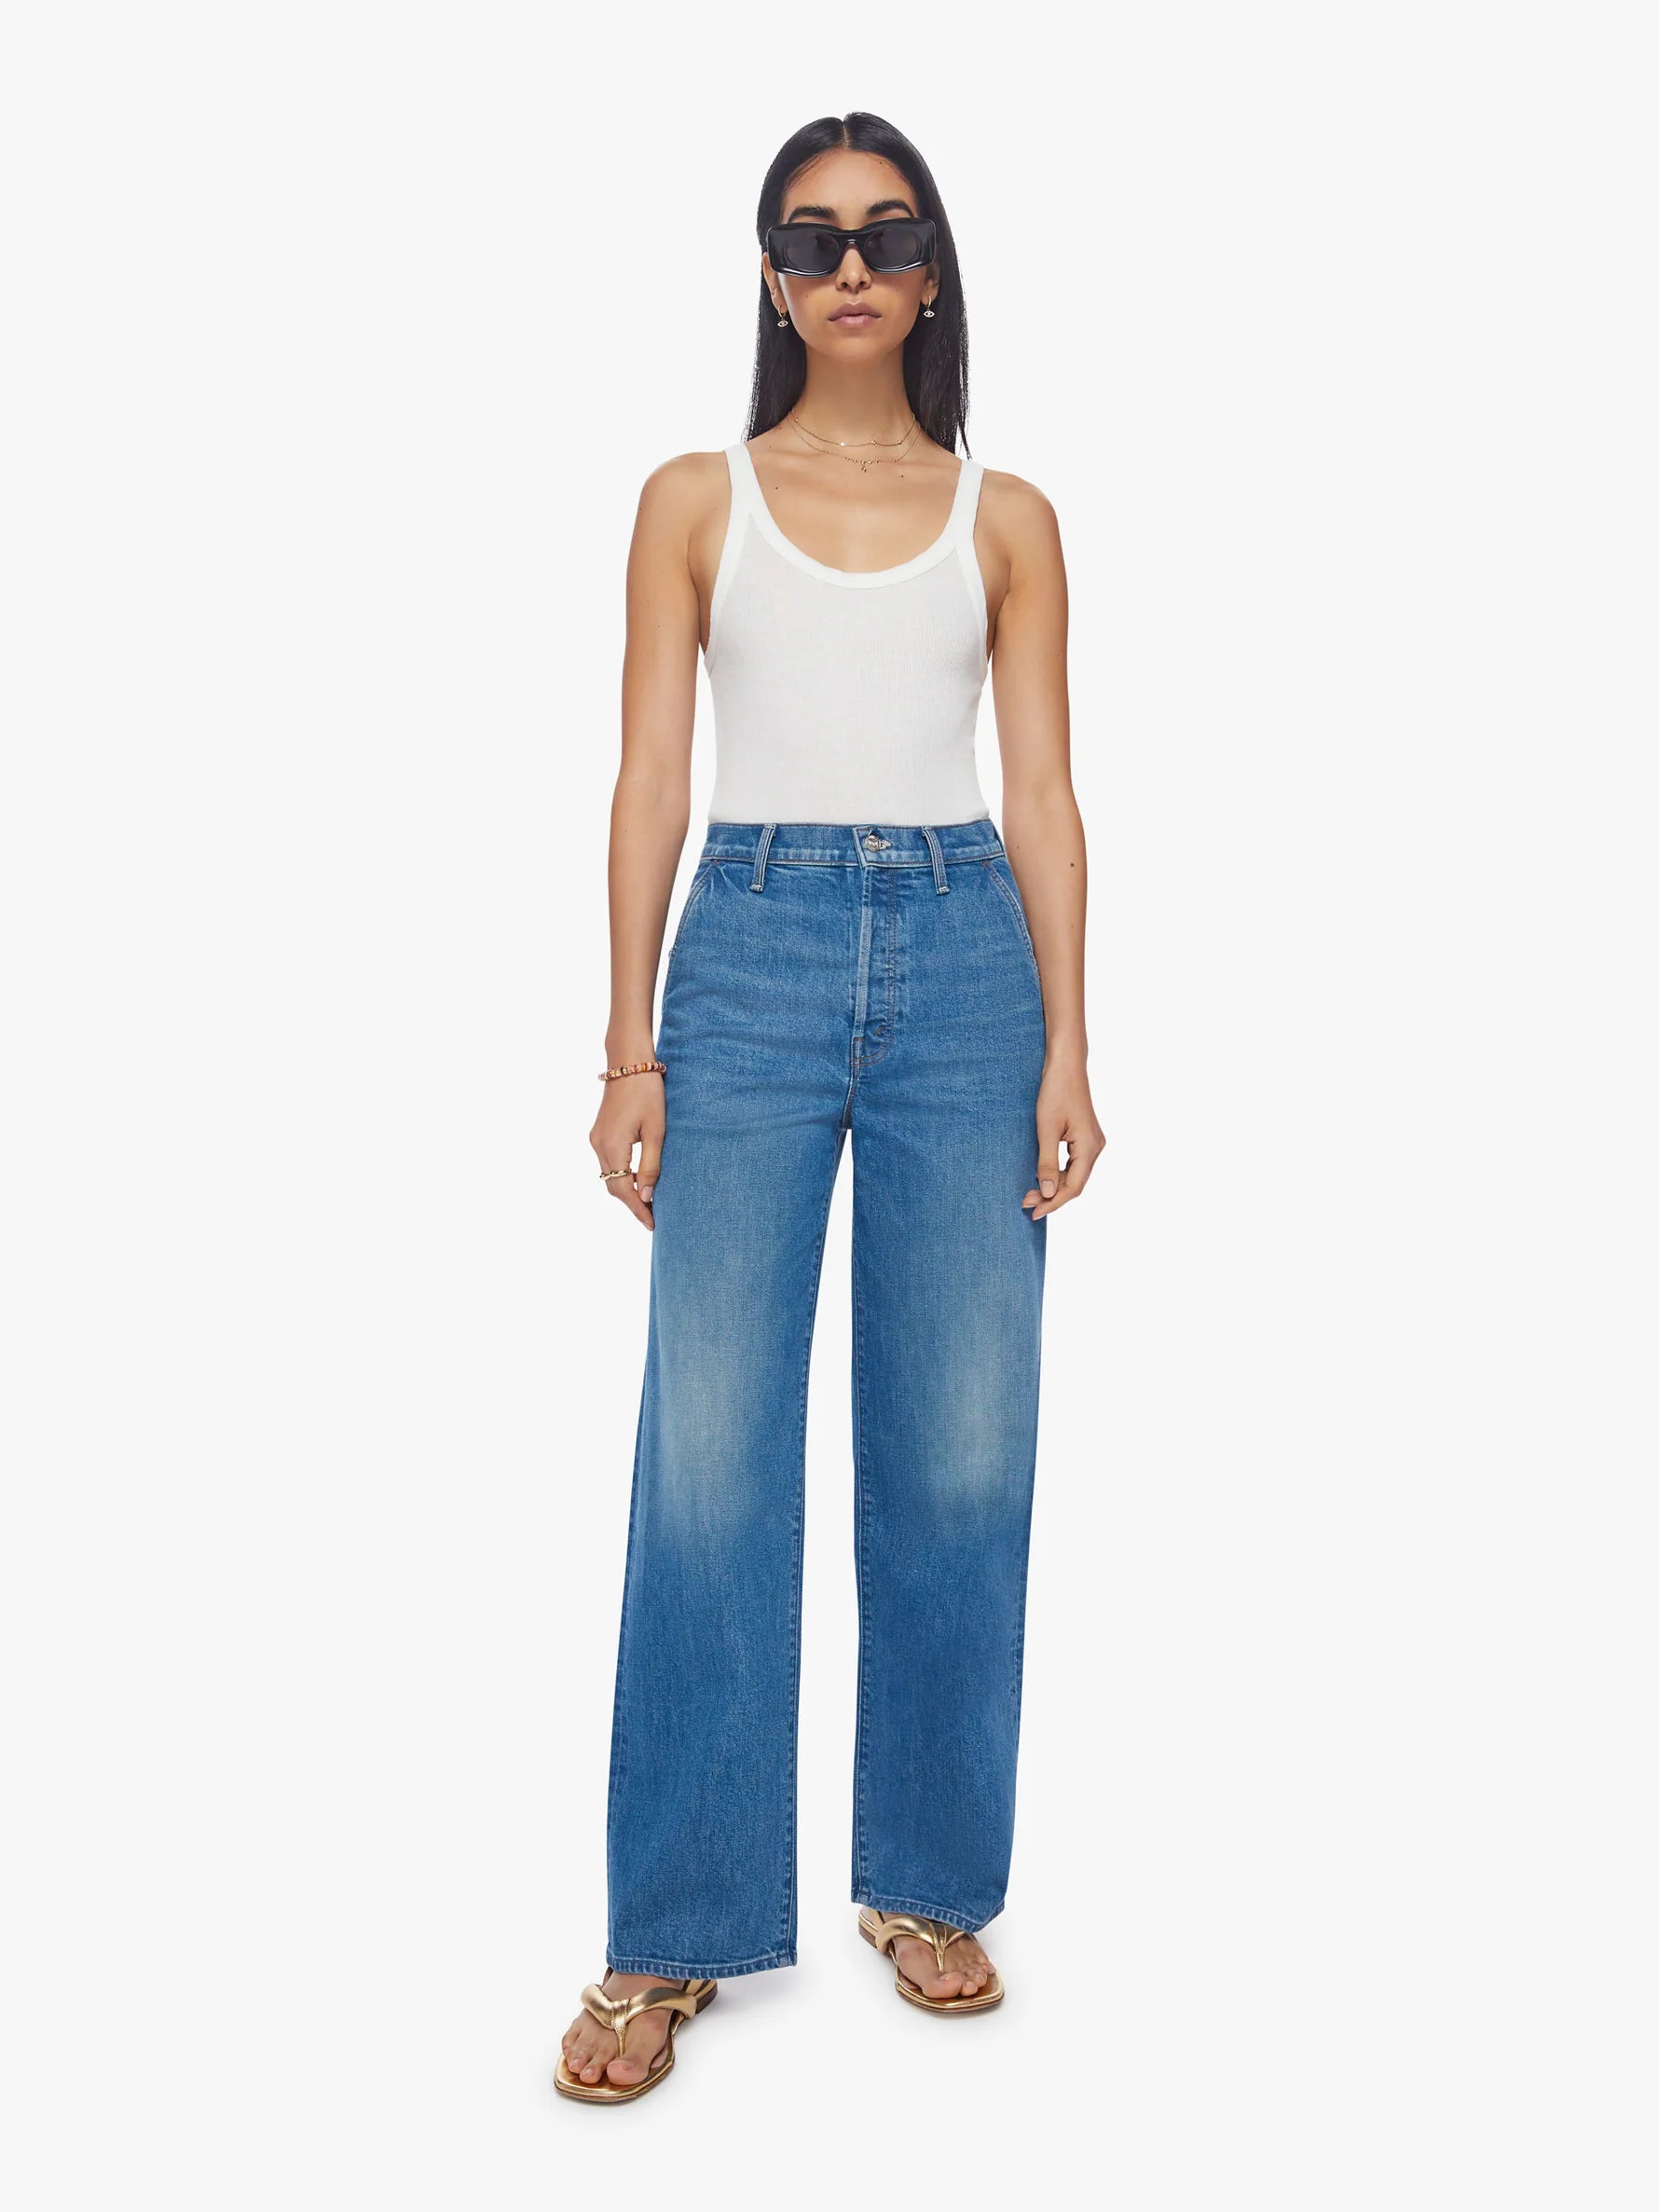 Blast from the past. Super high-rise jeans with a loose wide leg, button fly, slit pockets and a 31-inch inseam with a clean hem. Cut from semi-rigid SUPERIOR denim, Flashback is a mid-blue wash with subtle fading and whiskering.  This style runs small. MOTHER suggests sizing up one size.   These jeans are rigid and take time to break in. MOTHER says patience is a virtue.